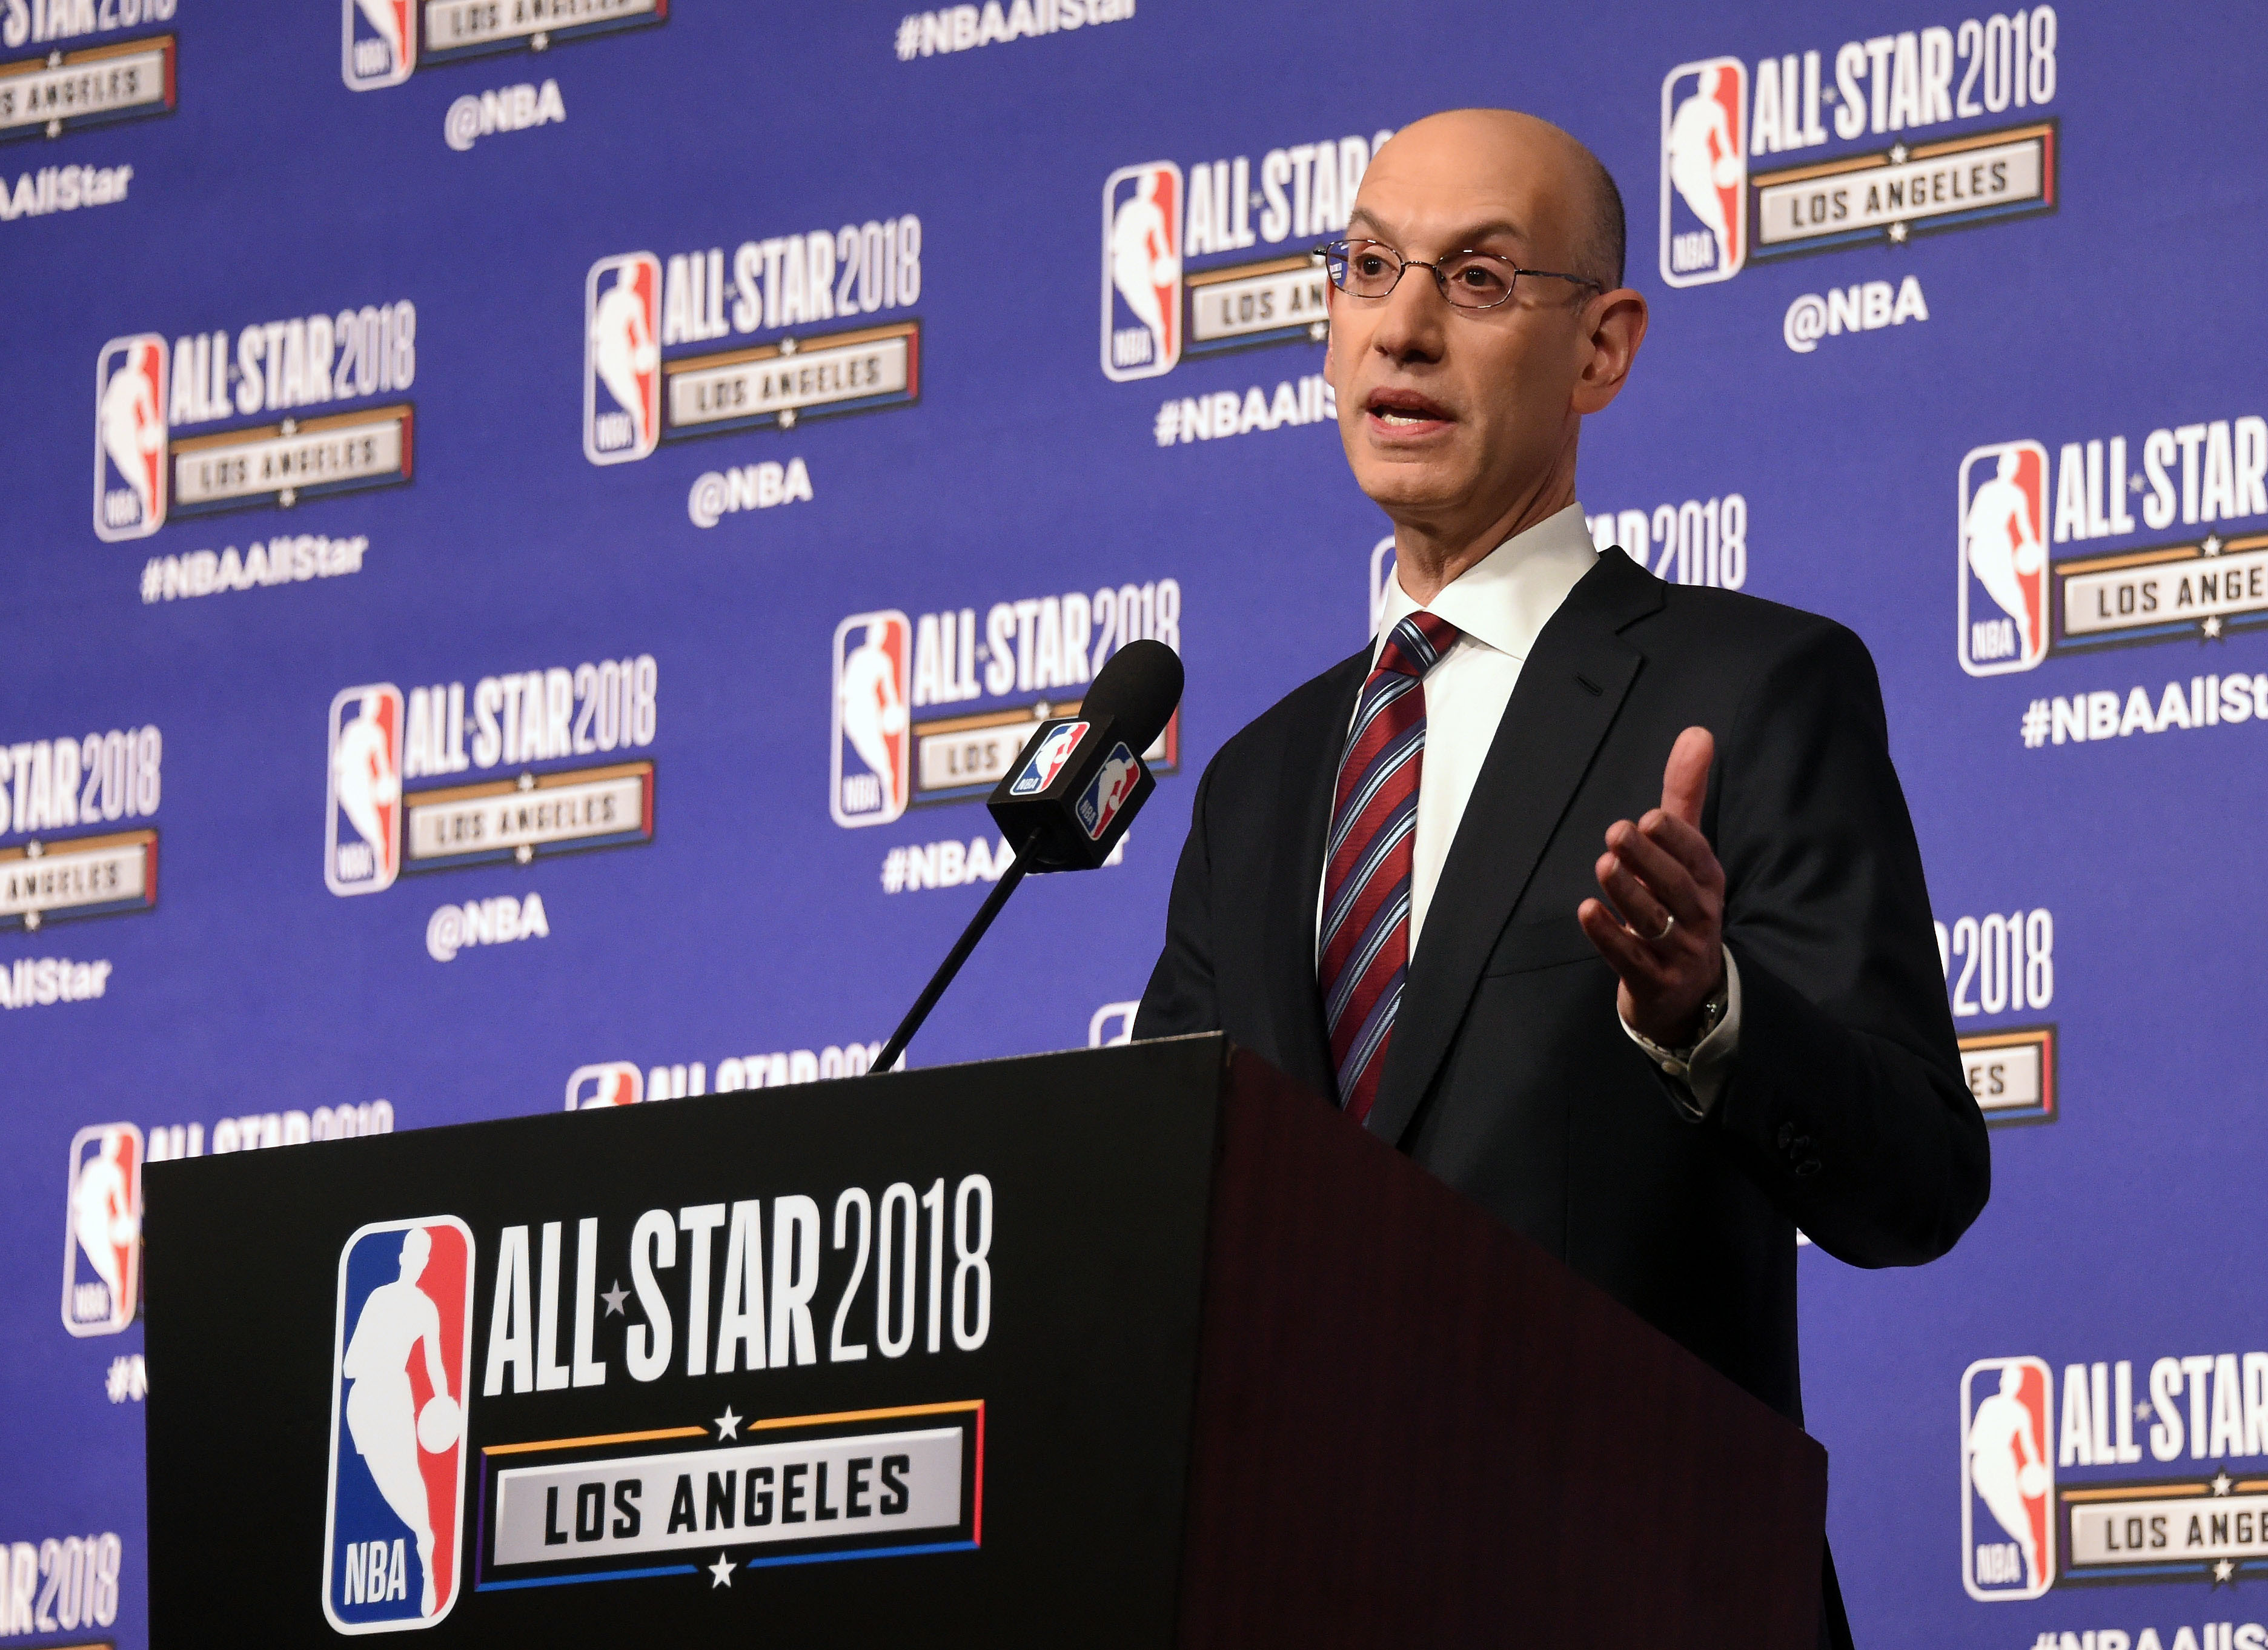 Next year, the NBA session in Mumbai can host a pre-match India: Adam Silver